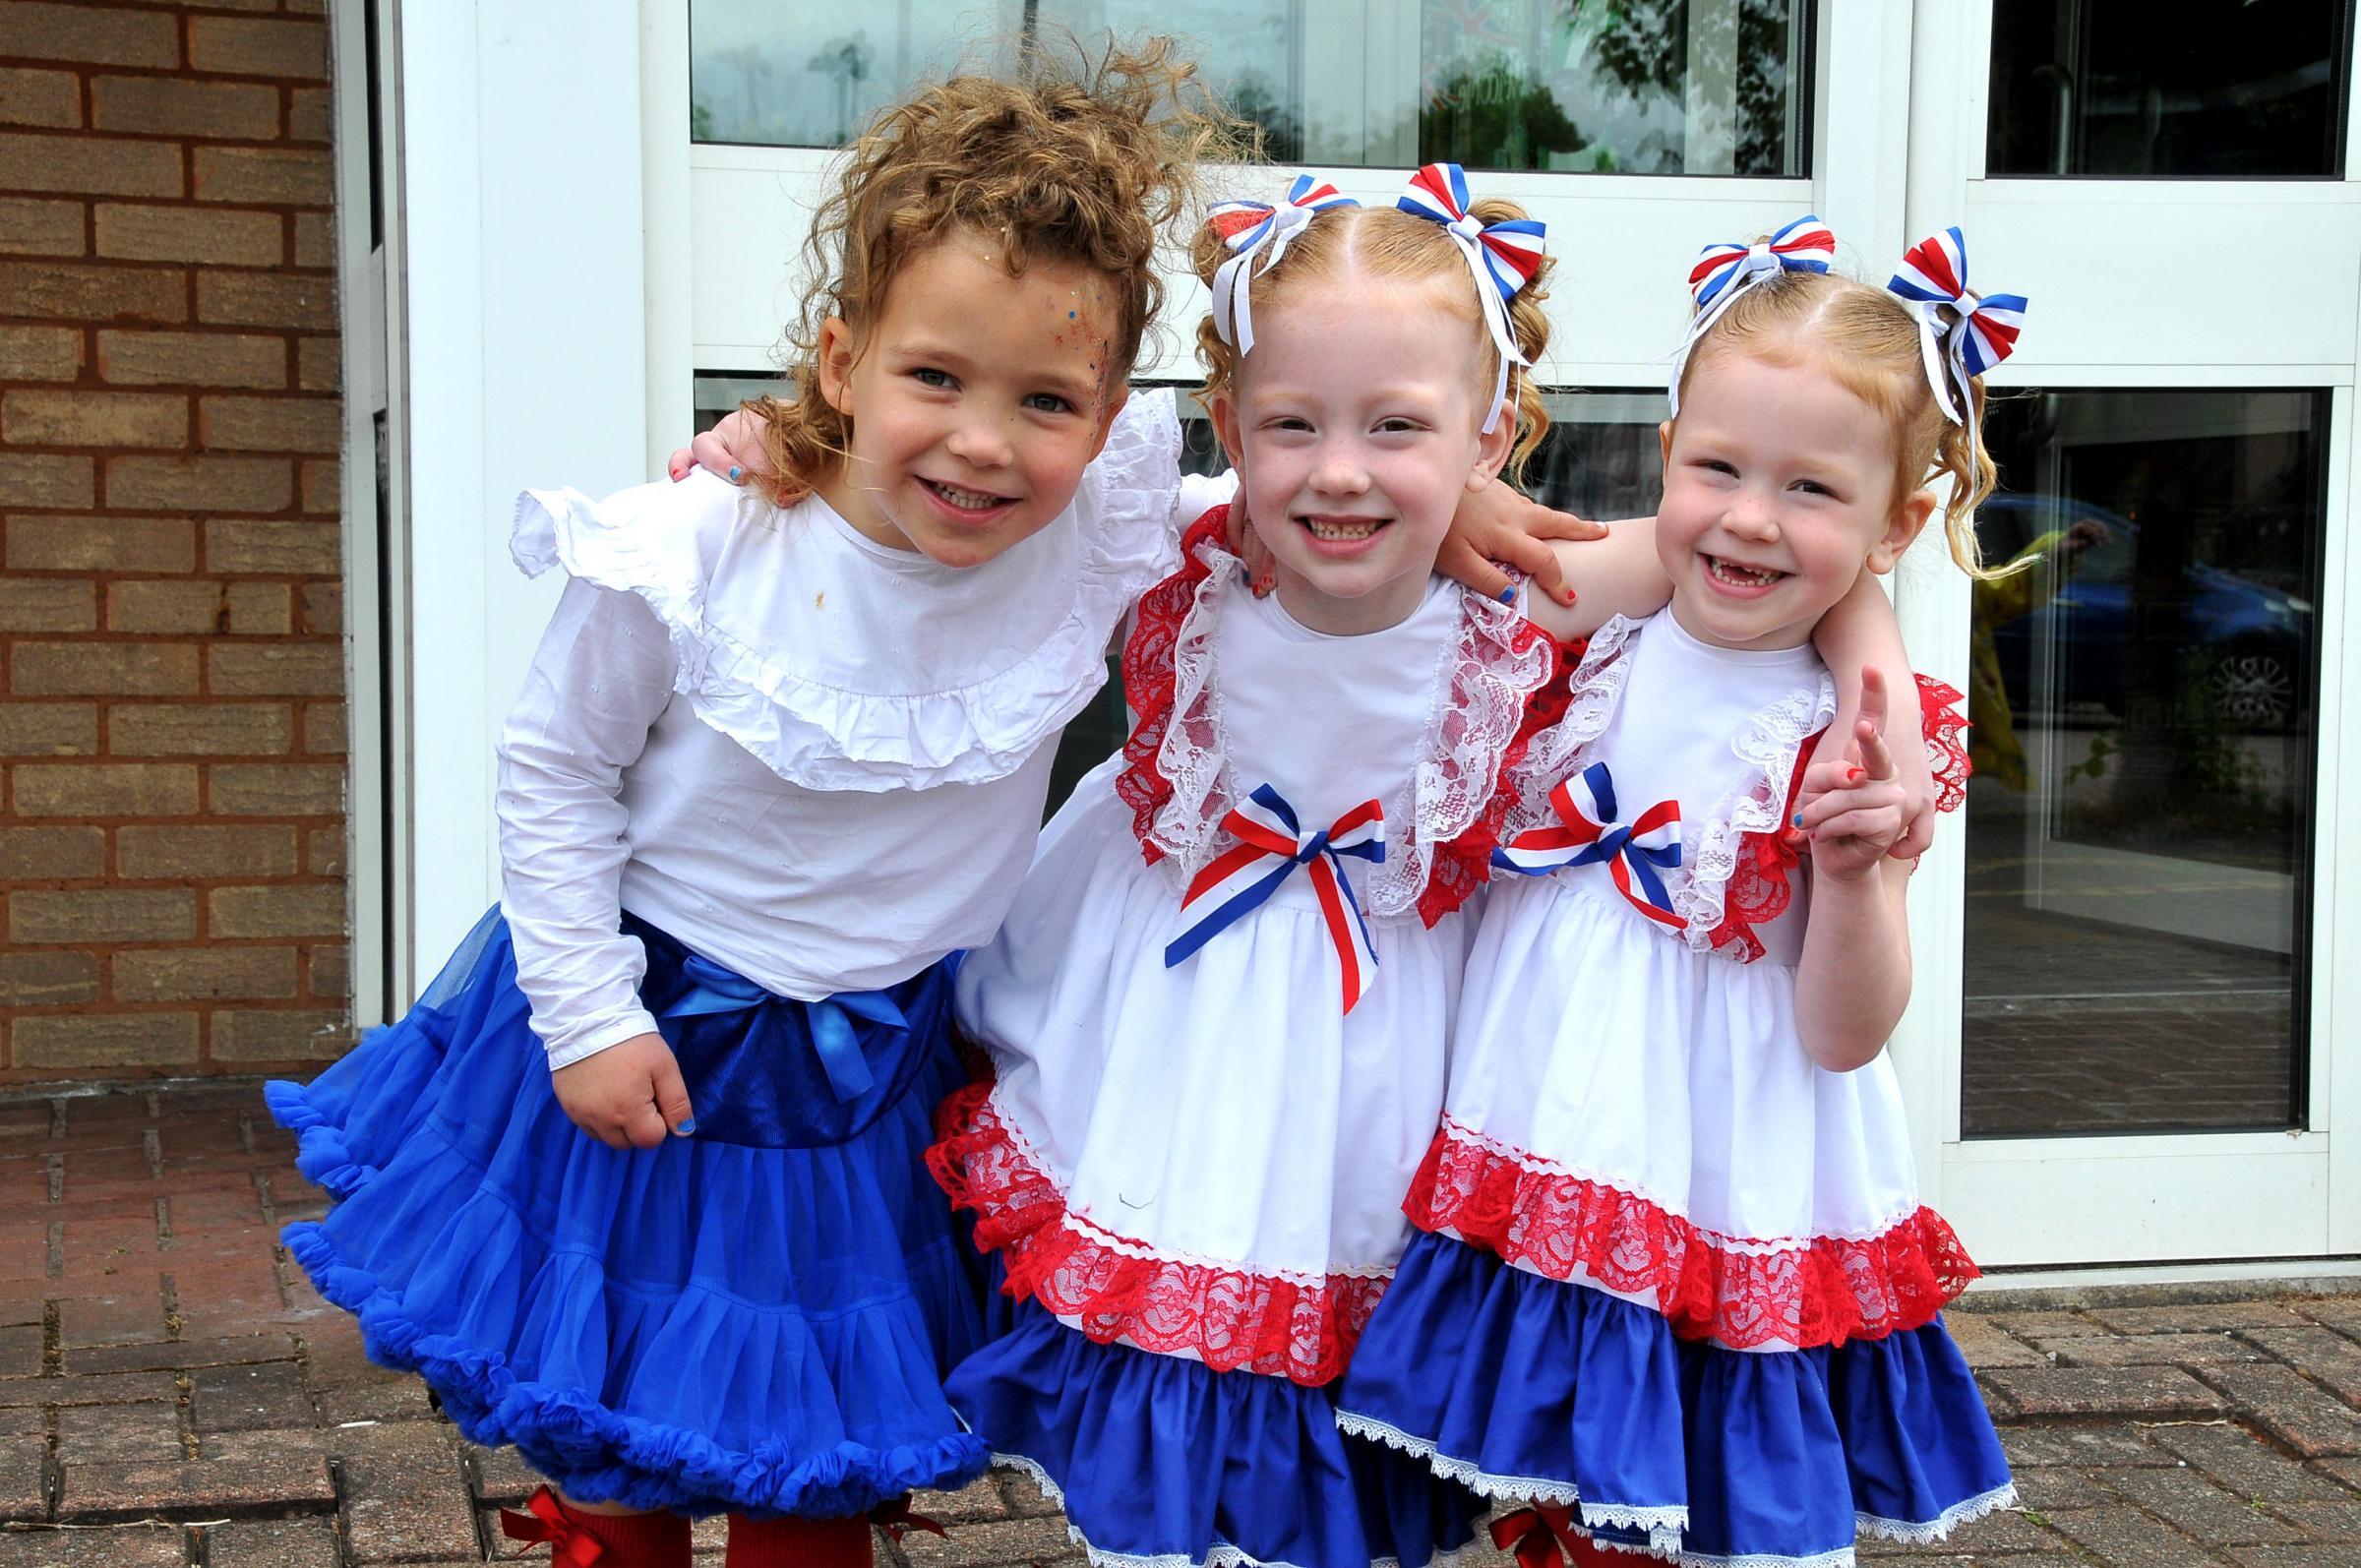 It was a day of red, white and blue for Birchwood CE Primary School youngsters Savanna Jaycock, Ezmae and Autumn MacDonald